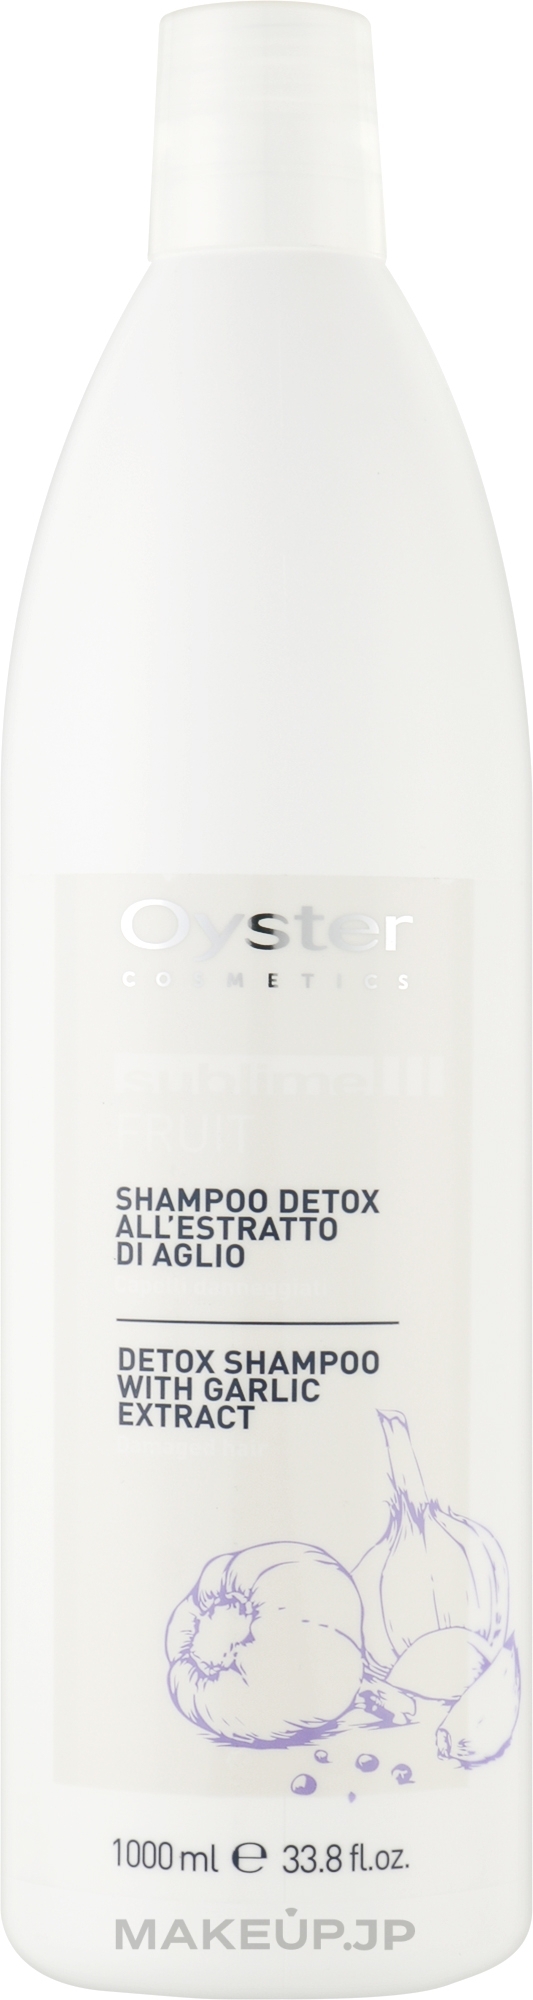 Cleansing Shampoo with Garlic Extract - Oyster Cosmetics Sublime Fruit Shampoo Detox — photo 1000 ml